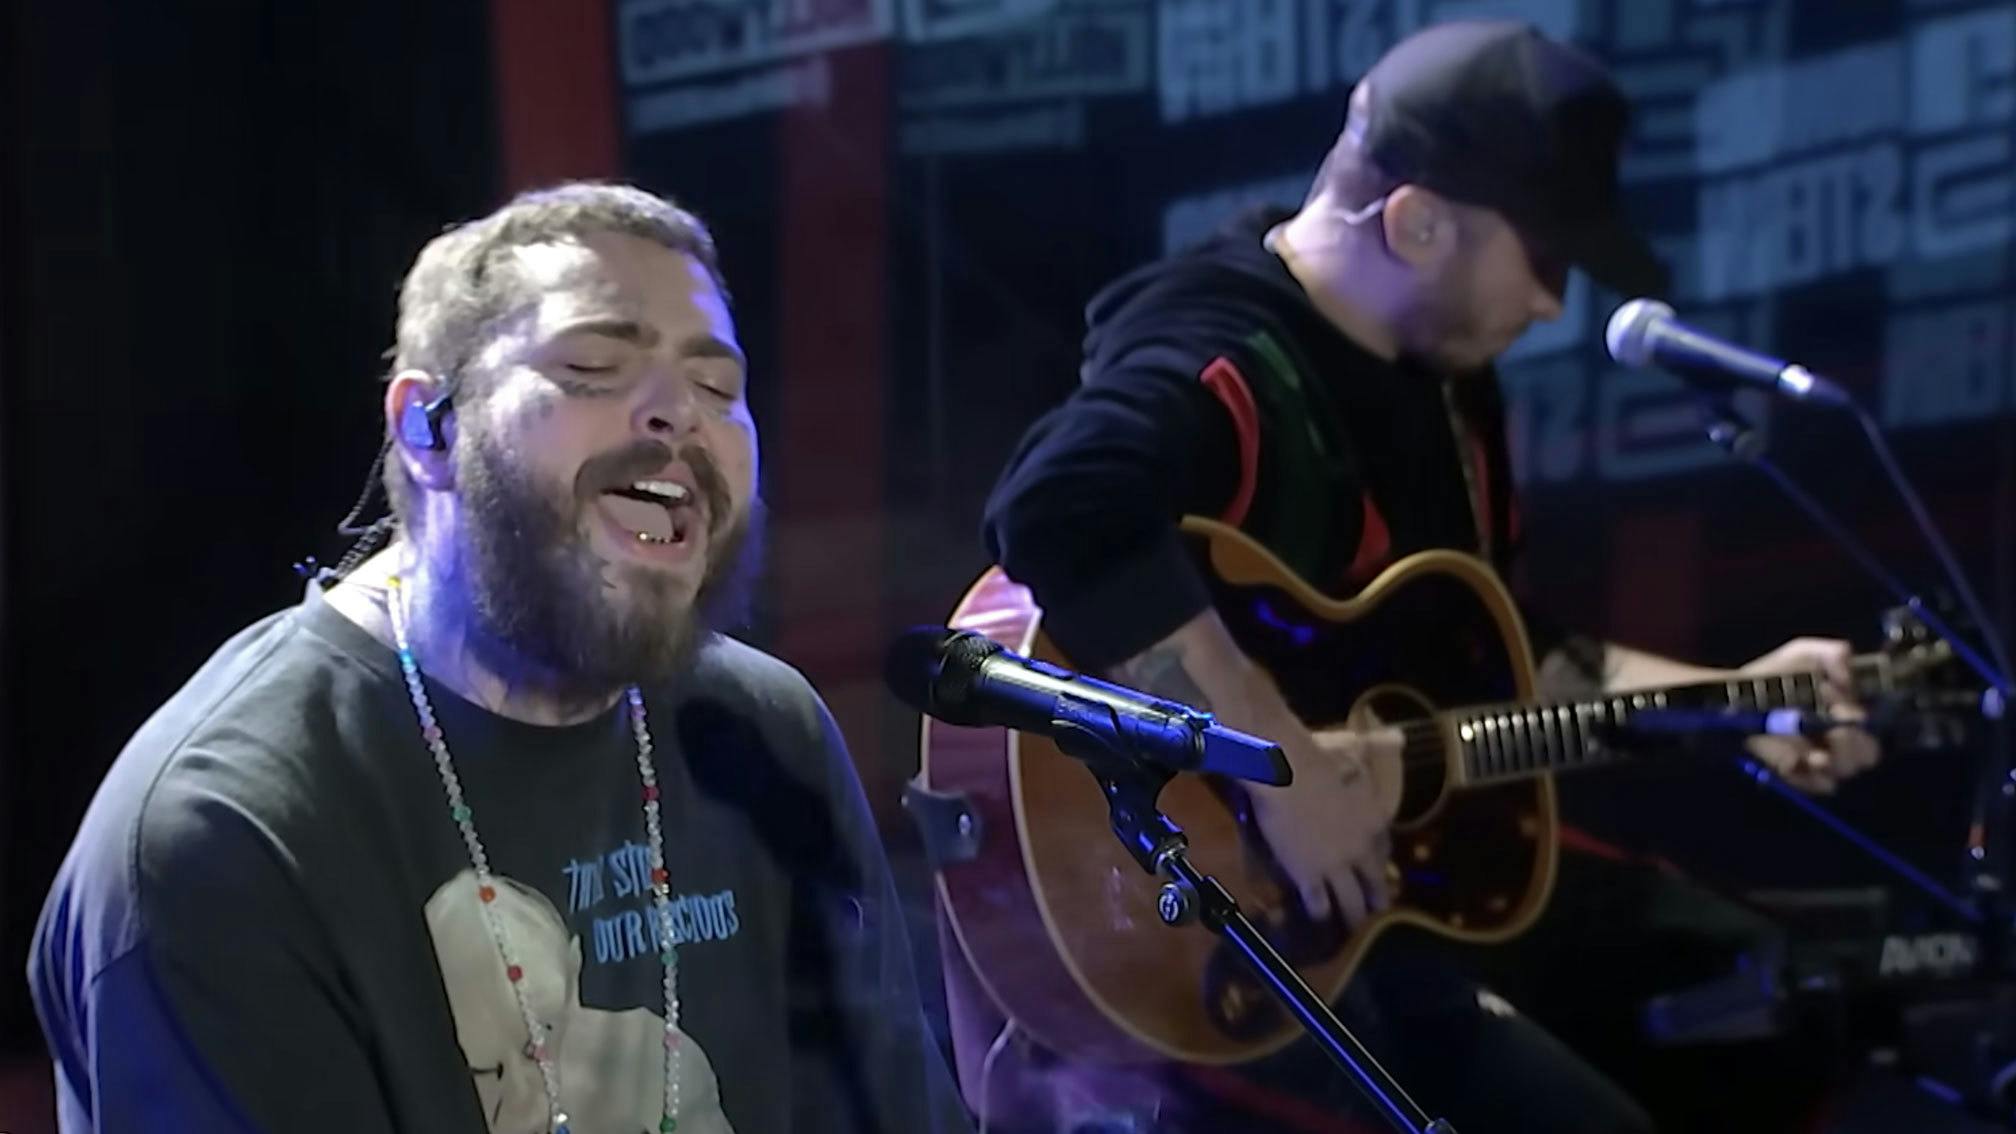 Post Malone has covered Pearl Jam’s Better Man